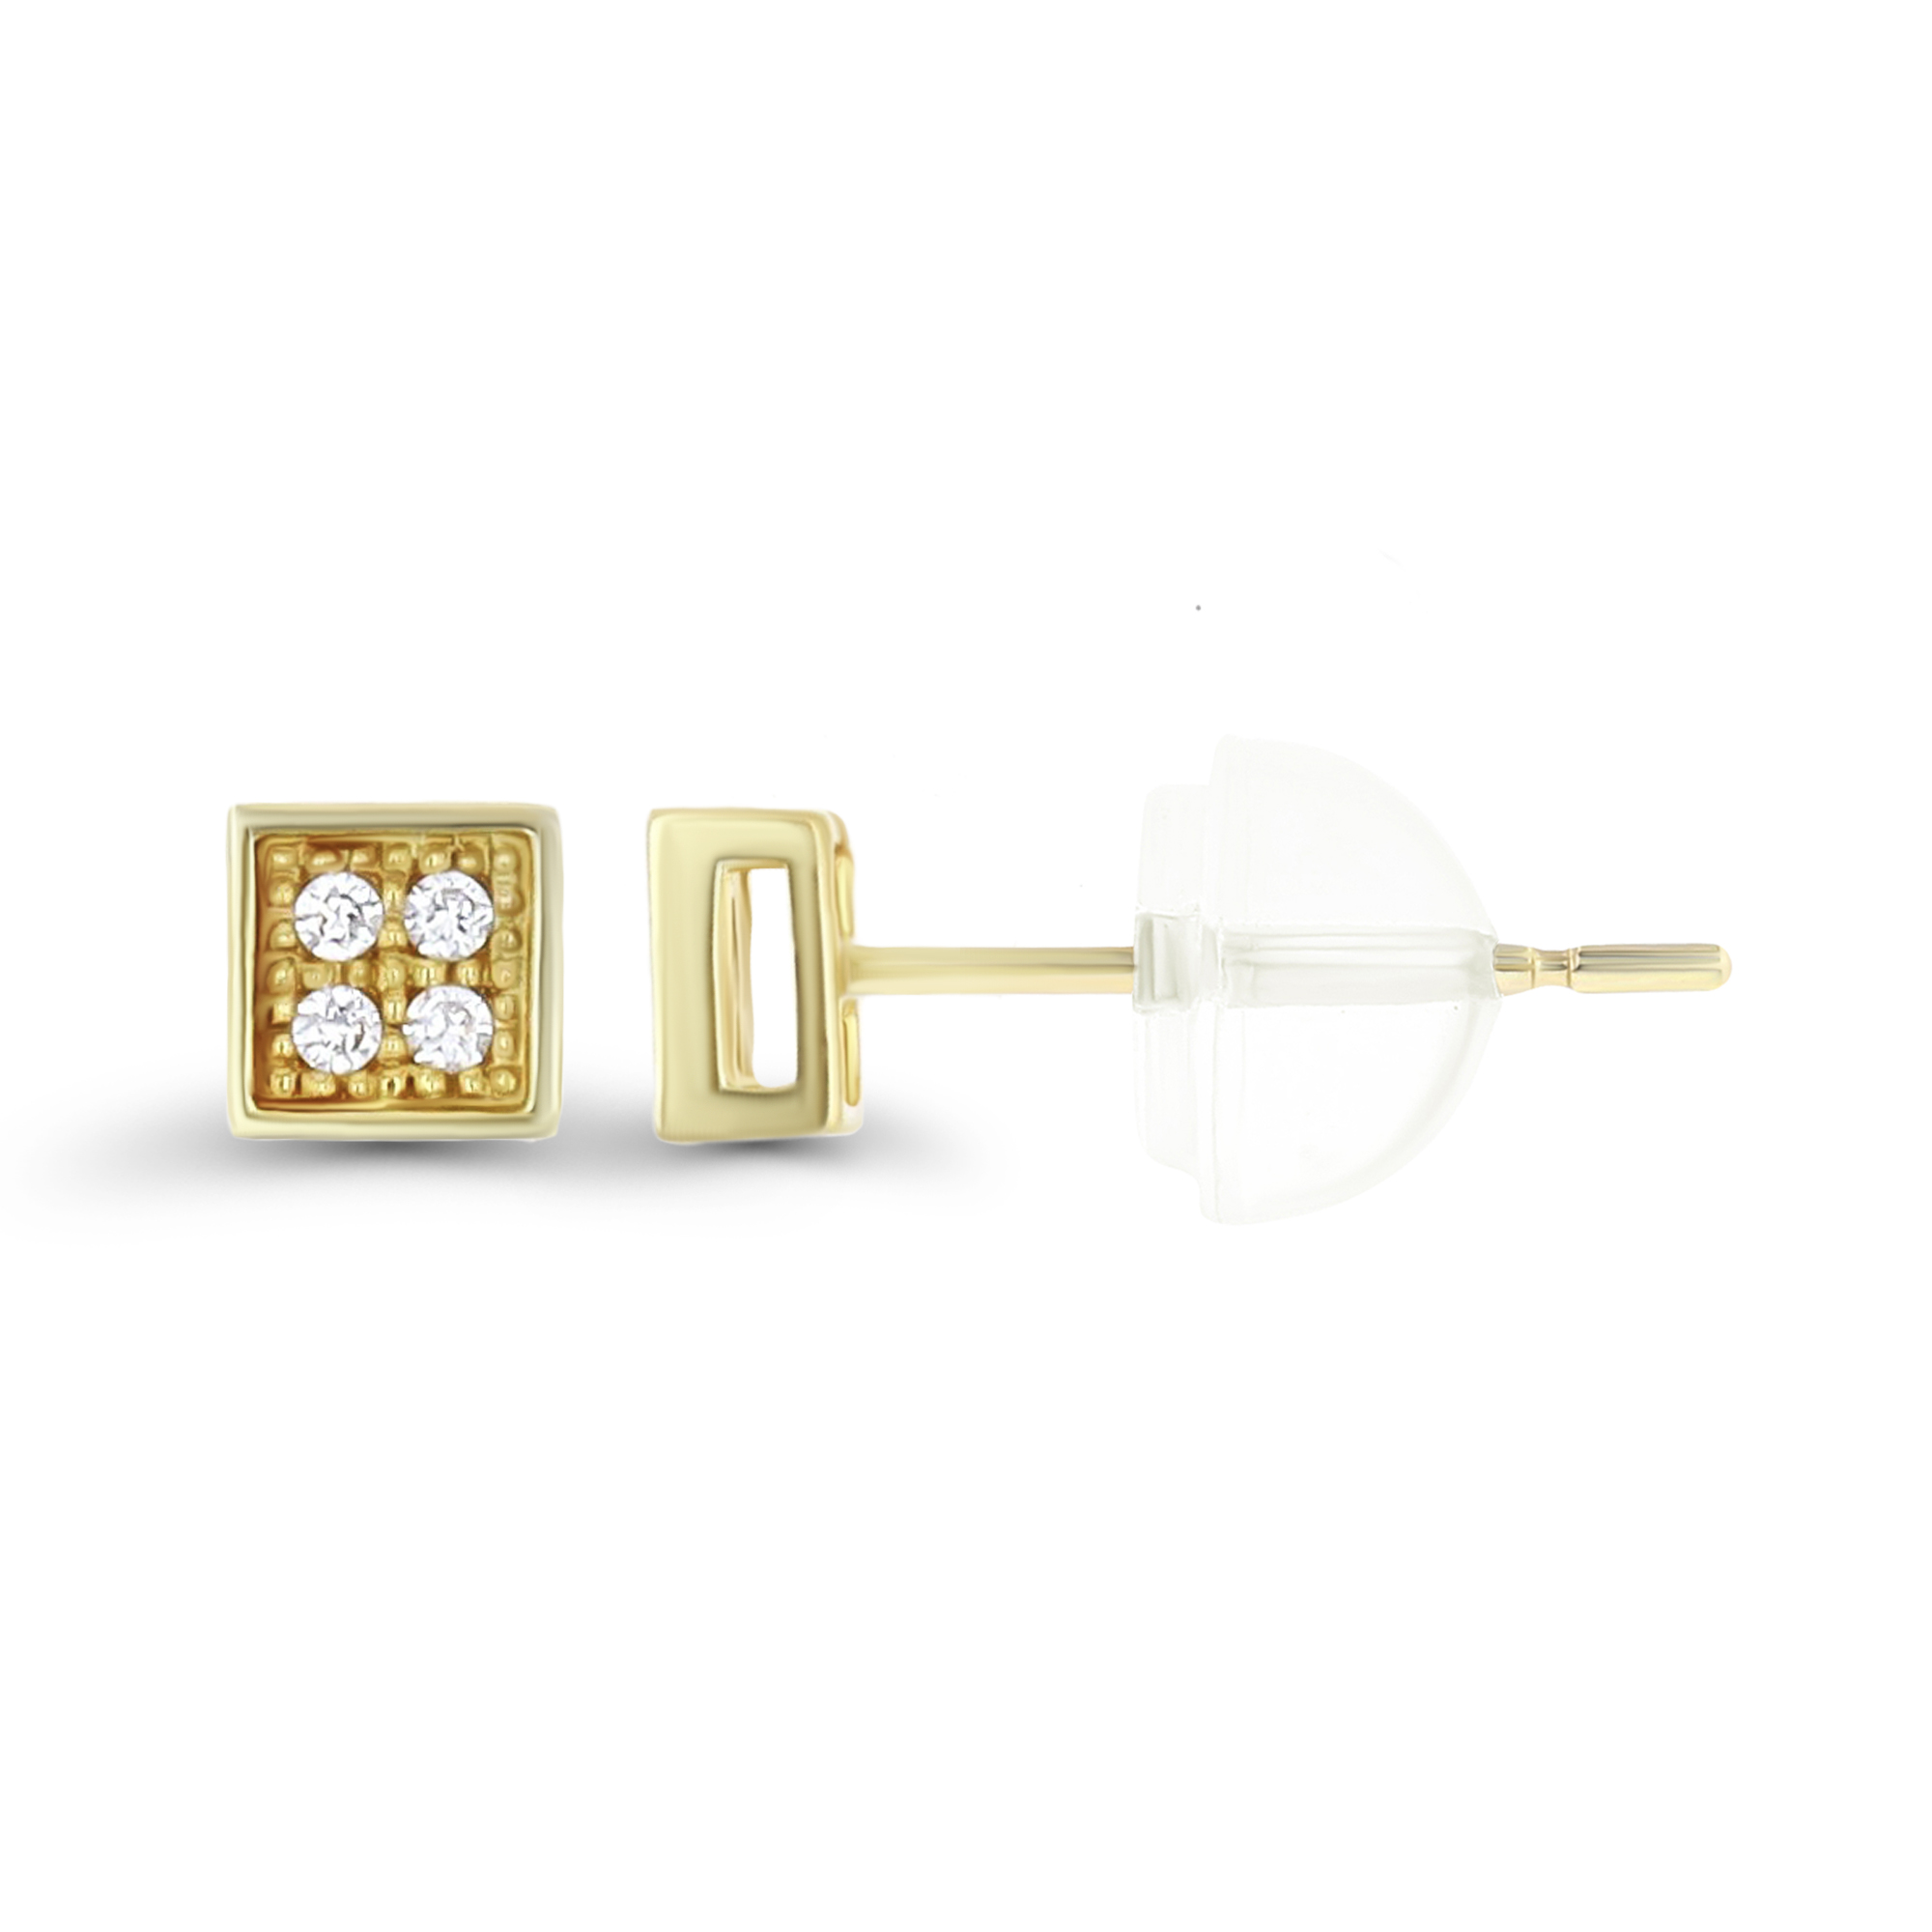 14K Yellow Gold Pave Small Square Stud Earring & 14K Silicone Back